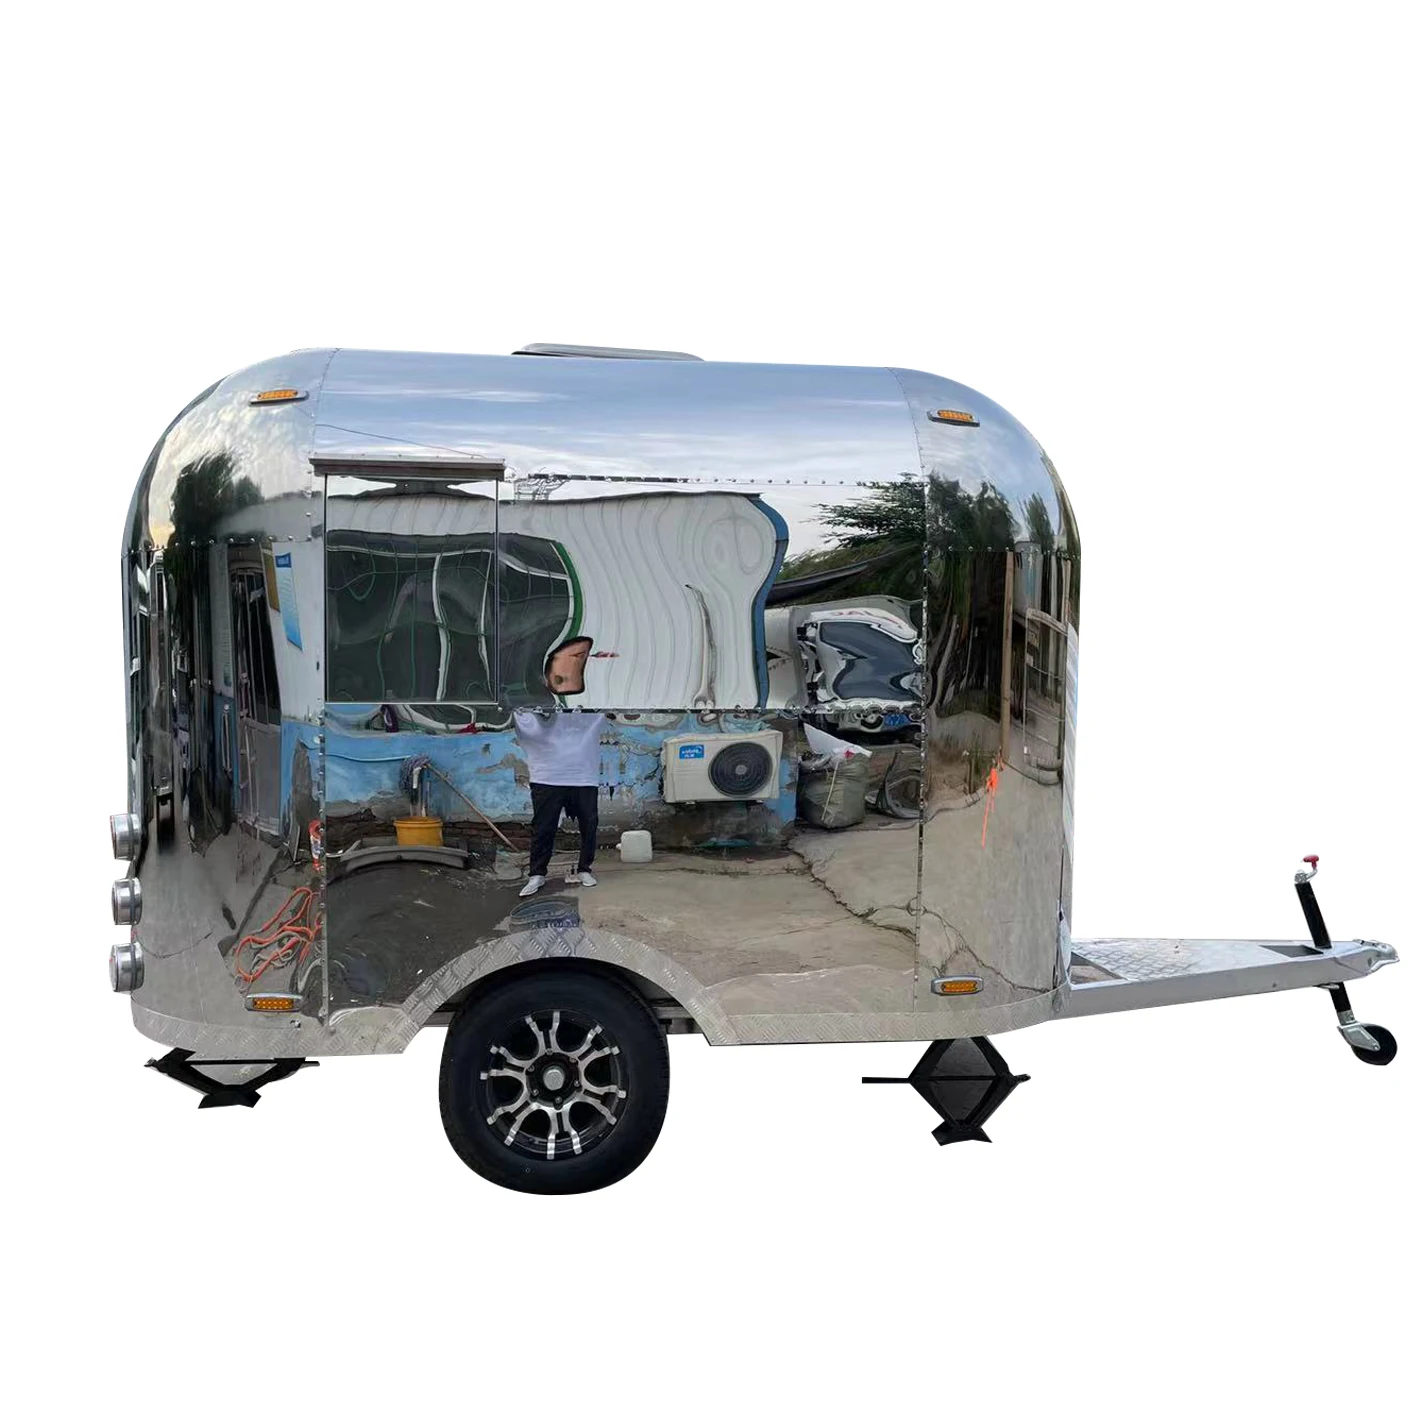 TUNE hot sale high quality new design camping trailer small size